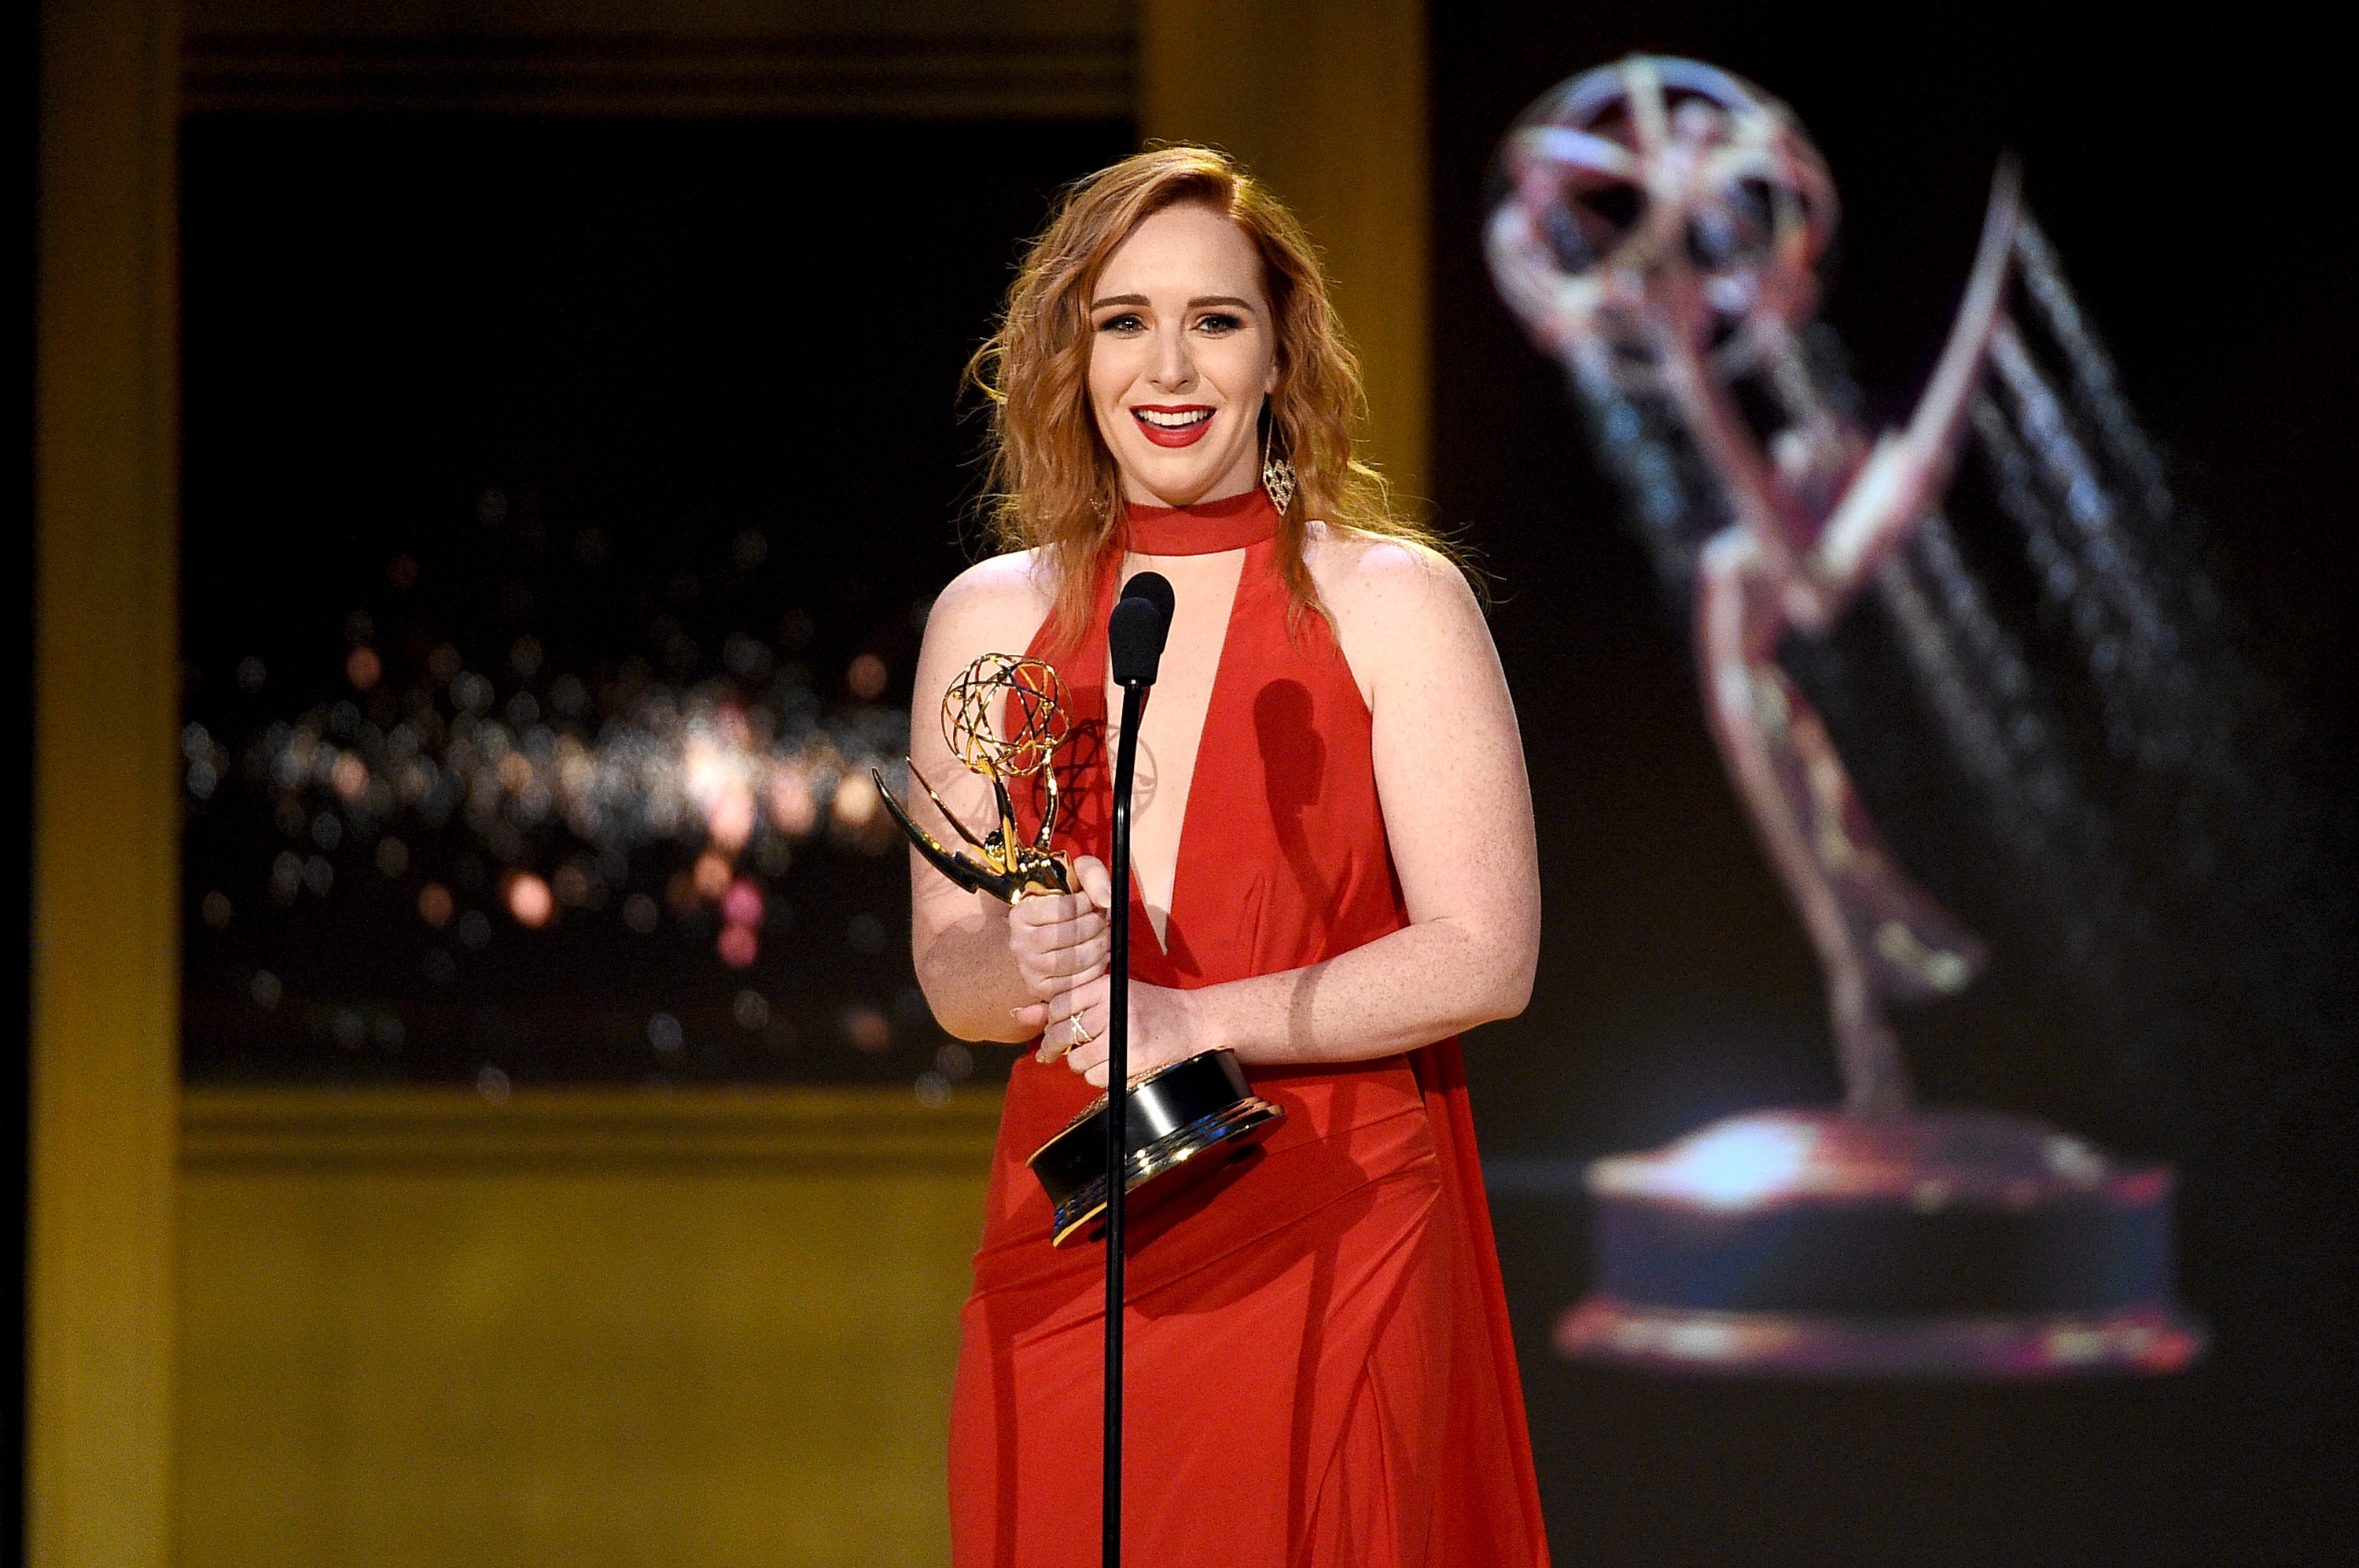 'The Young and the Restless' actor Camryn Grimes in a red dress as she accepts the Supporting Actress award at the 2018 Daytime Emmy Awards.